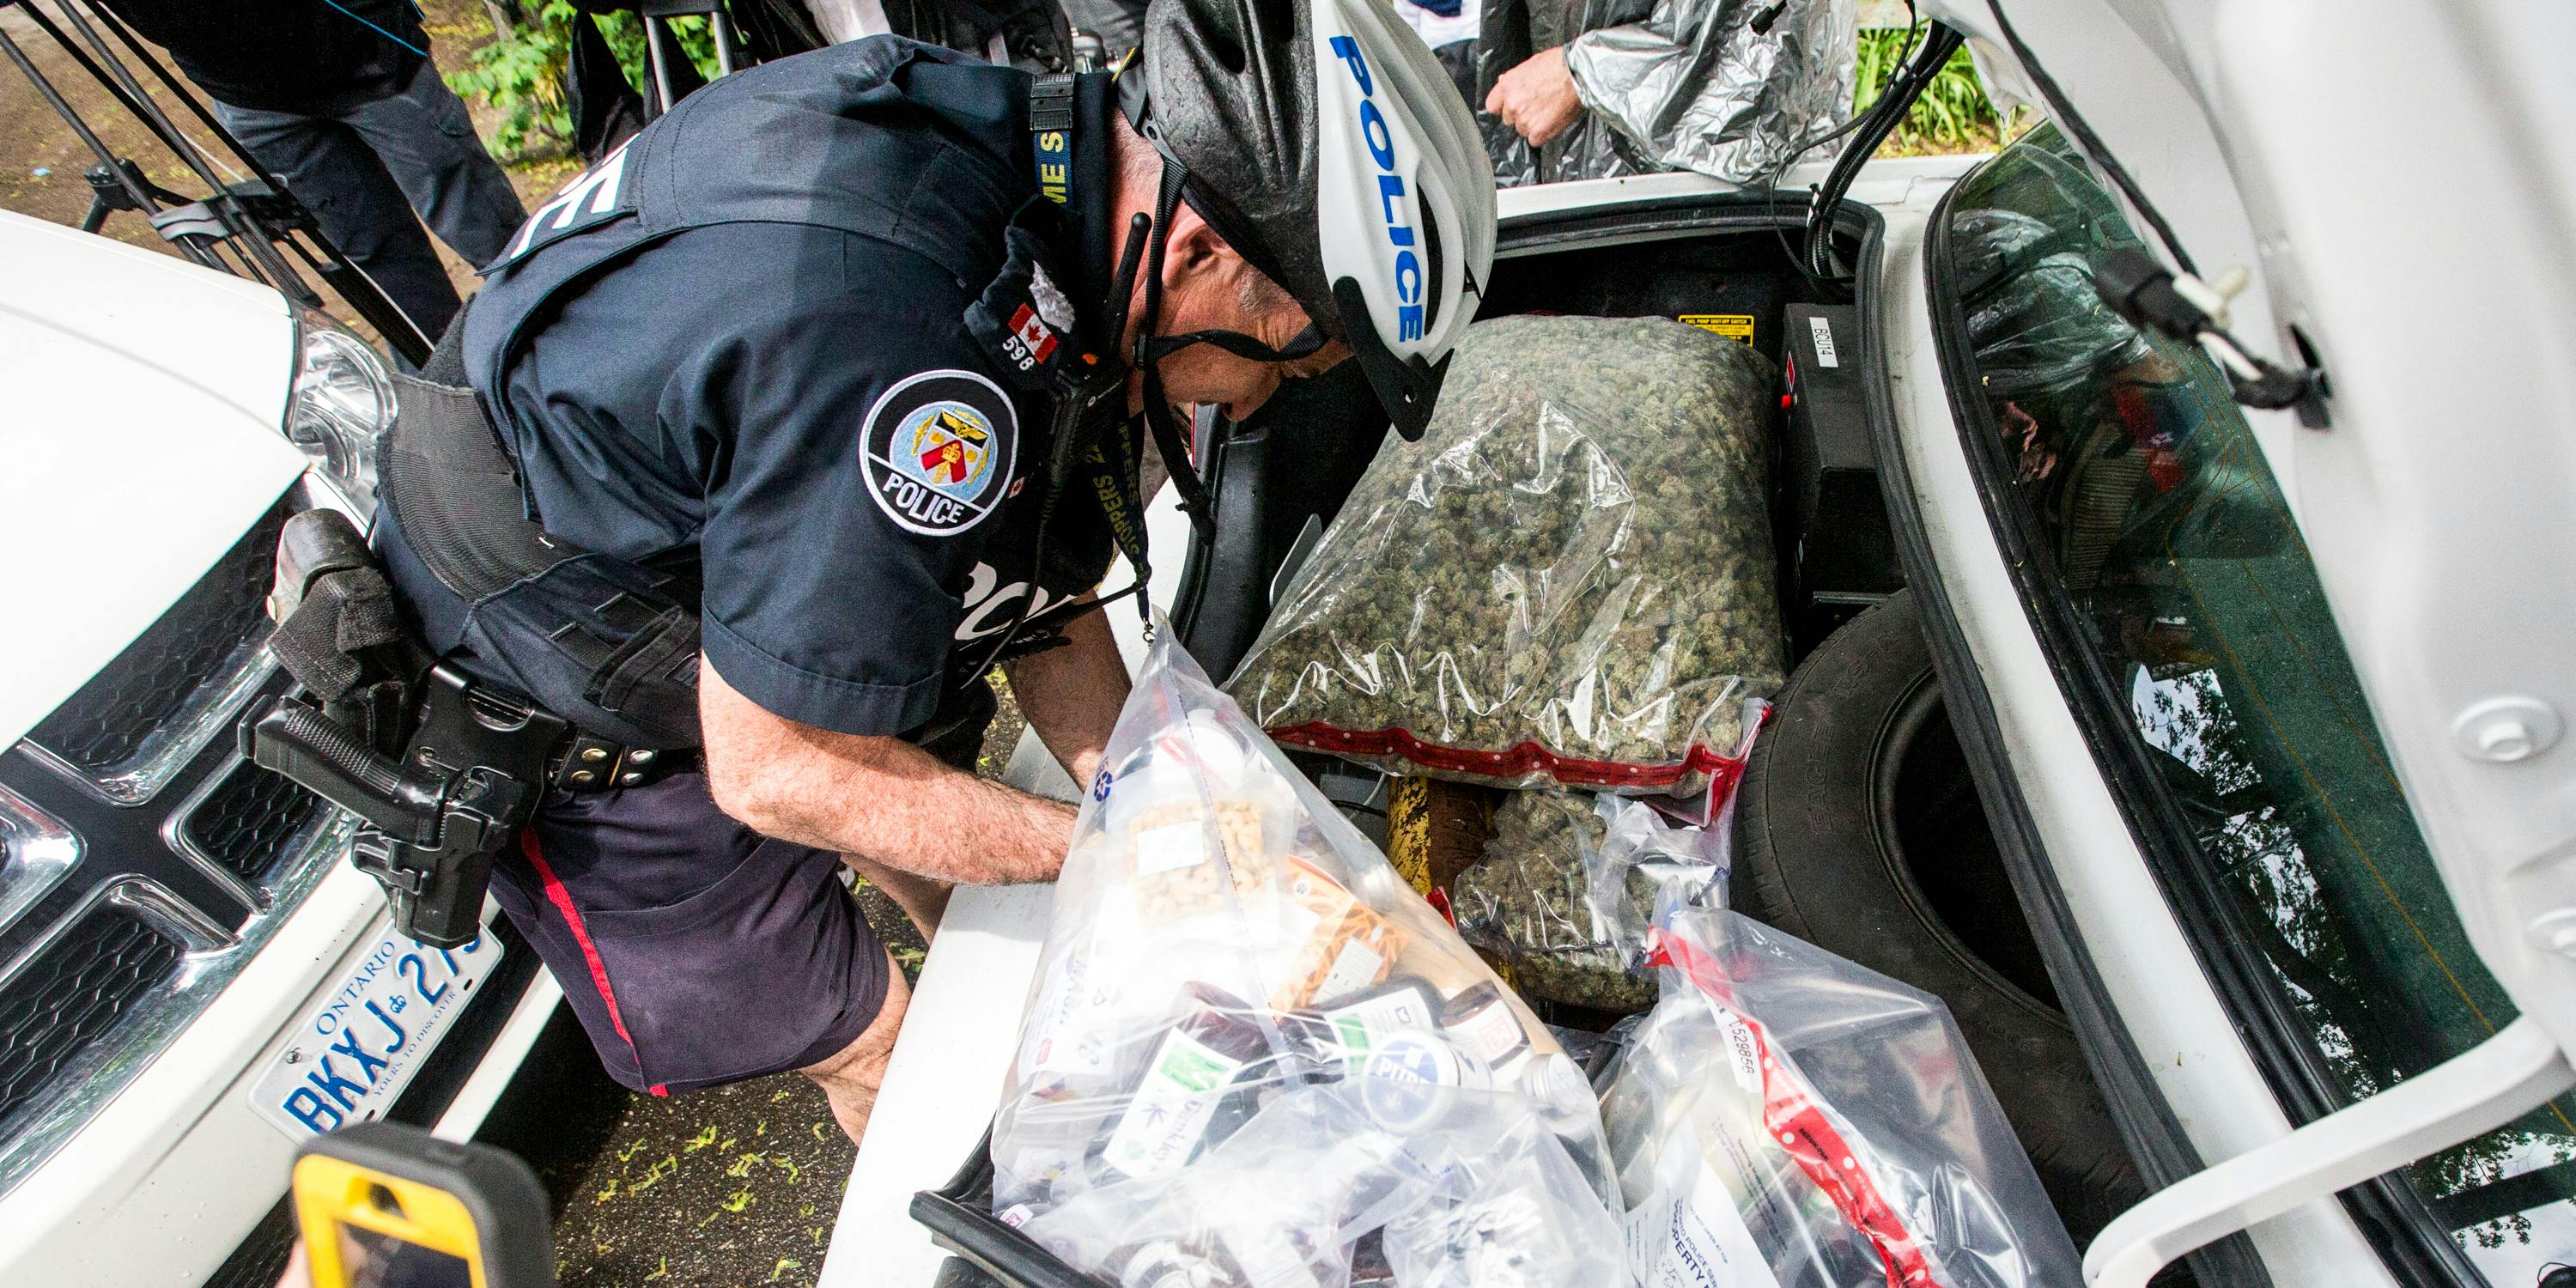 Hamilton Cops are running out of space for illegal weed